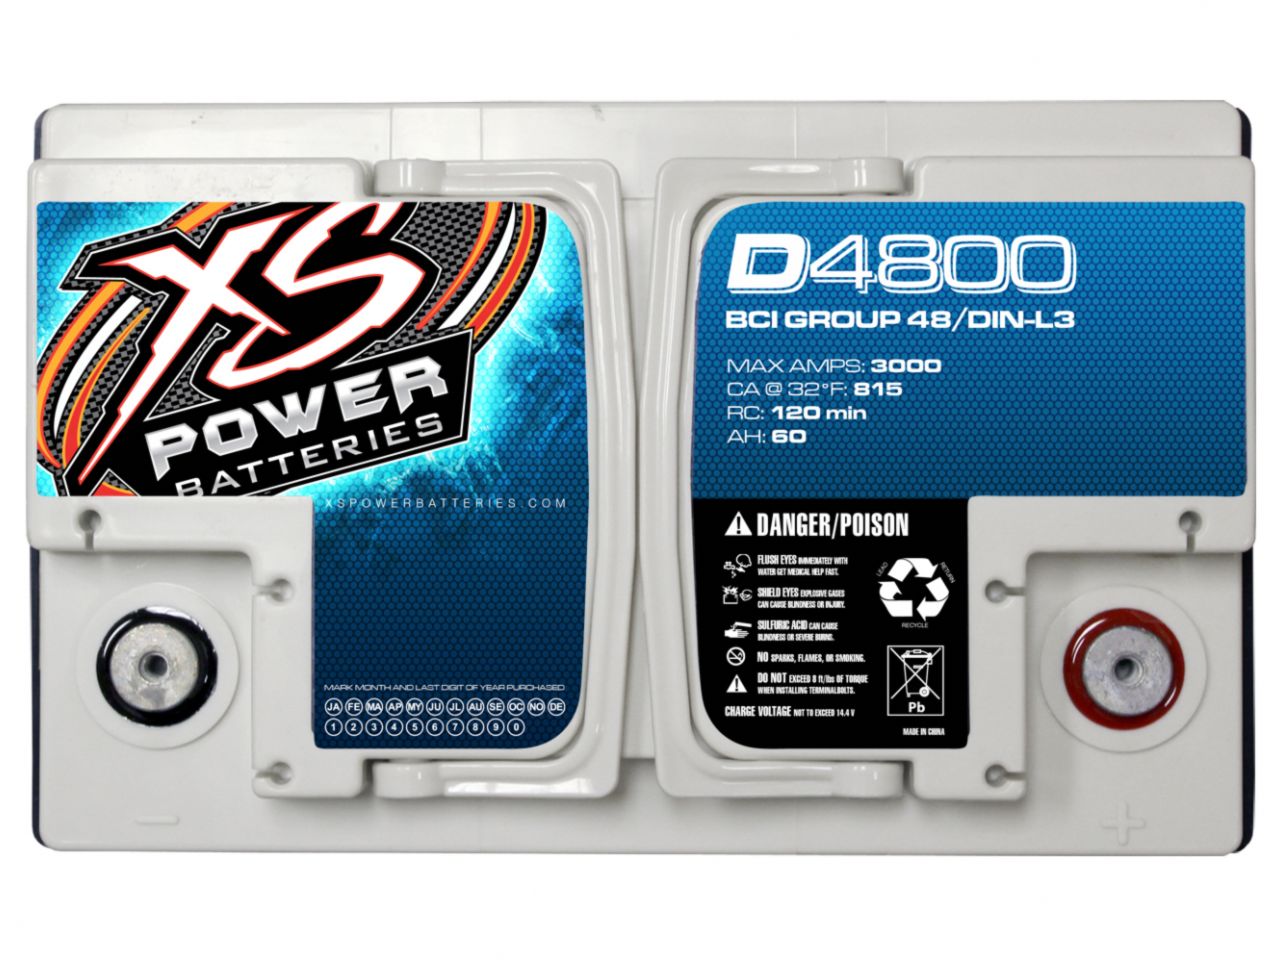 XS Power 12V BCI Group 48 AGM Battery, Max Amps 3000A, CA: 815 Ah: 60